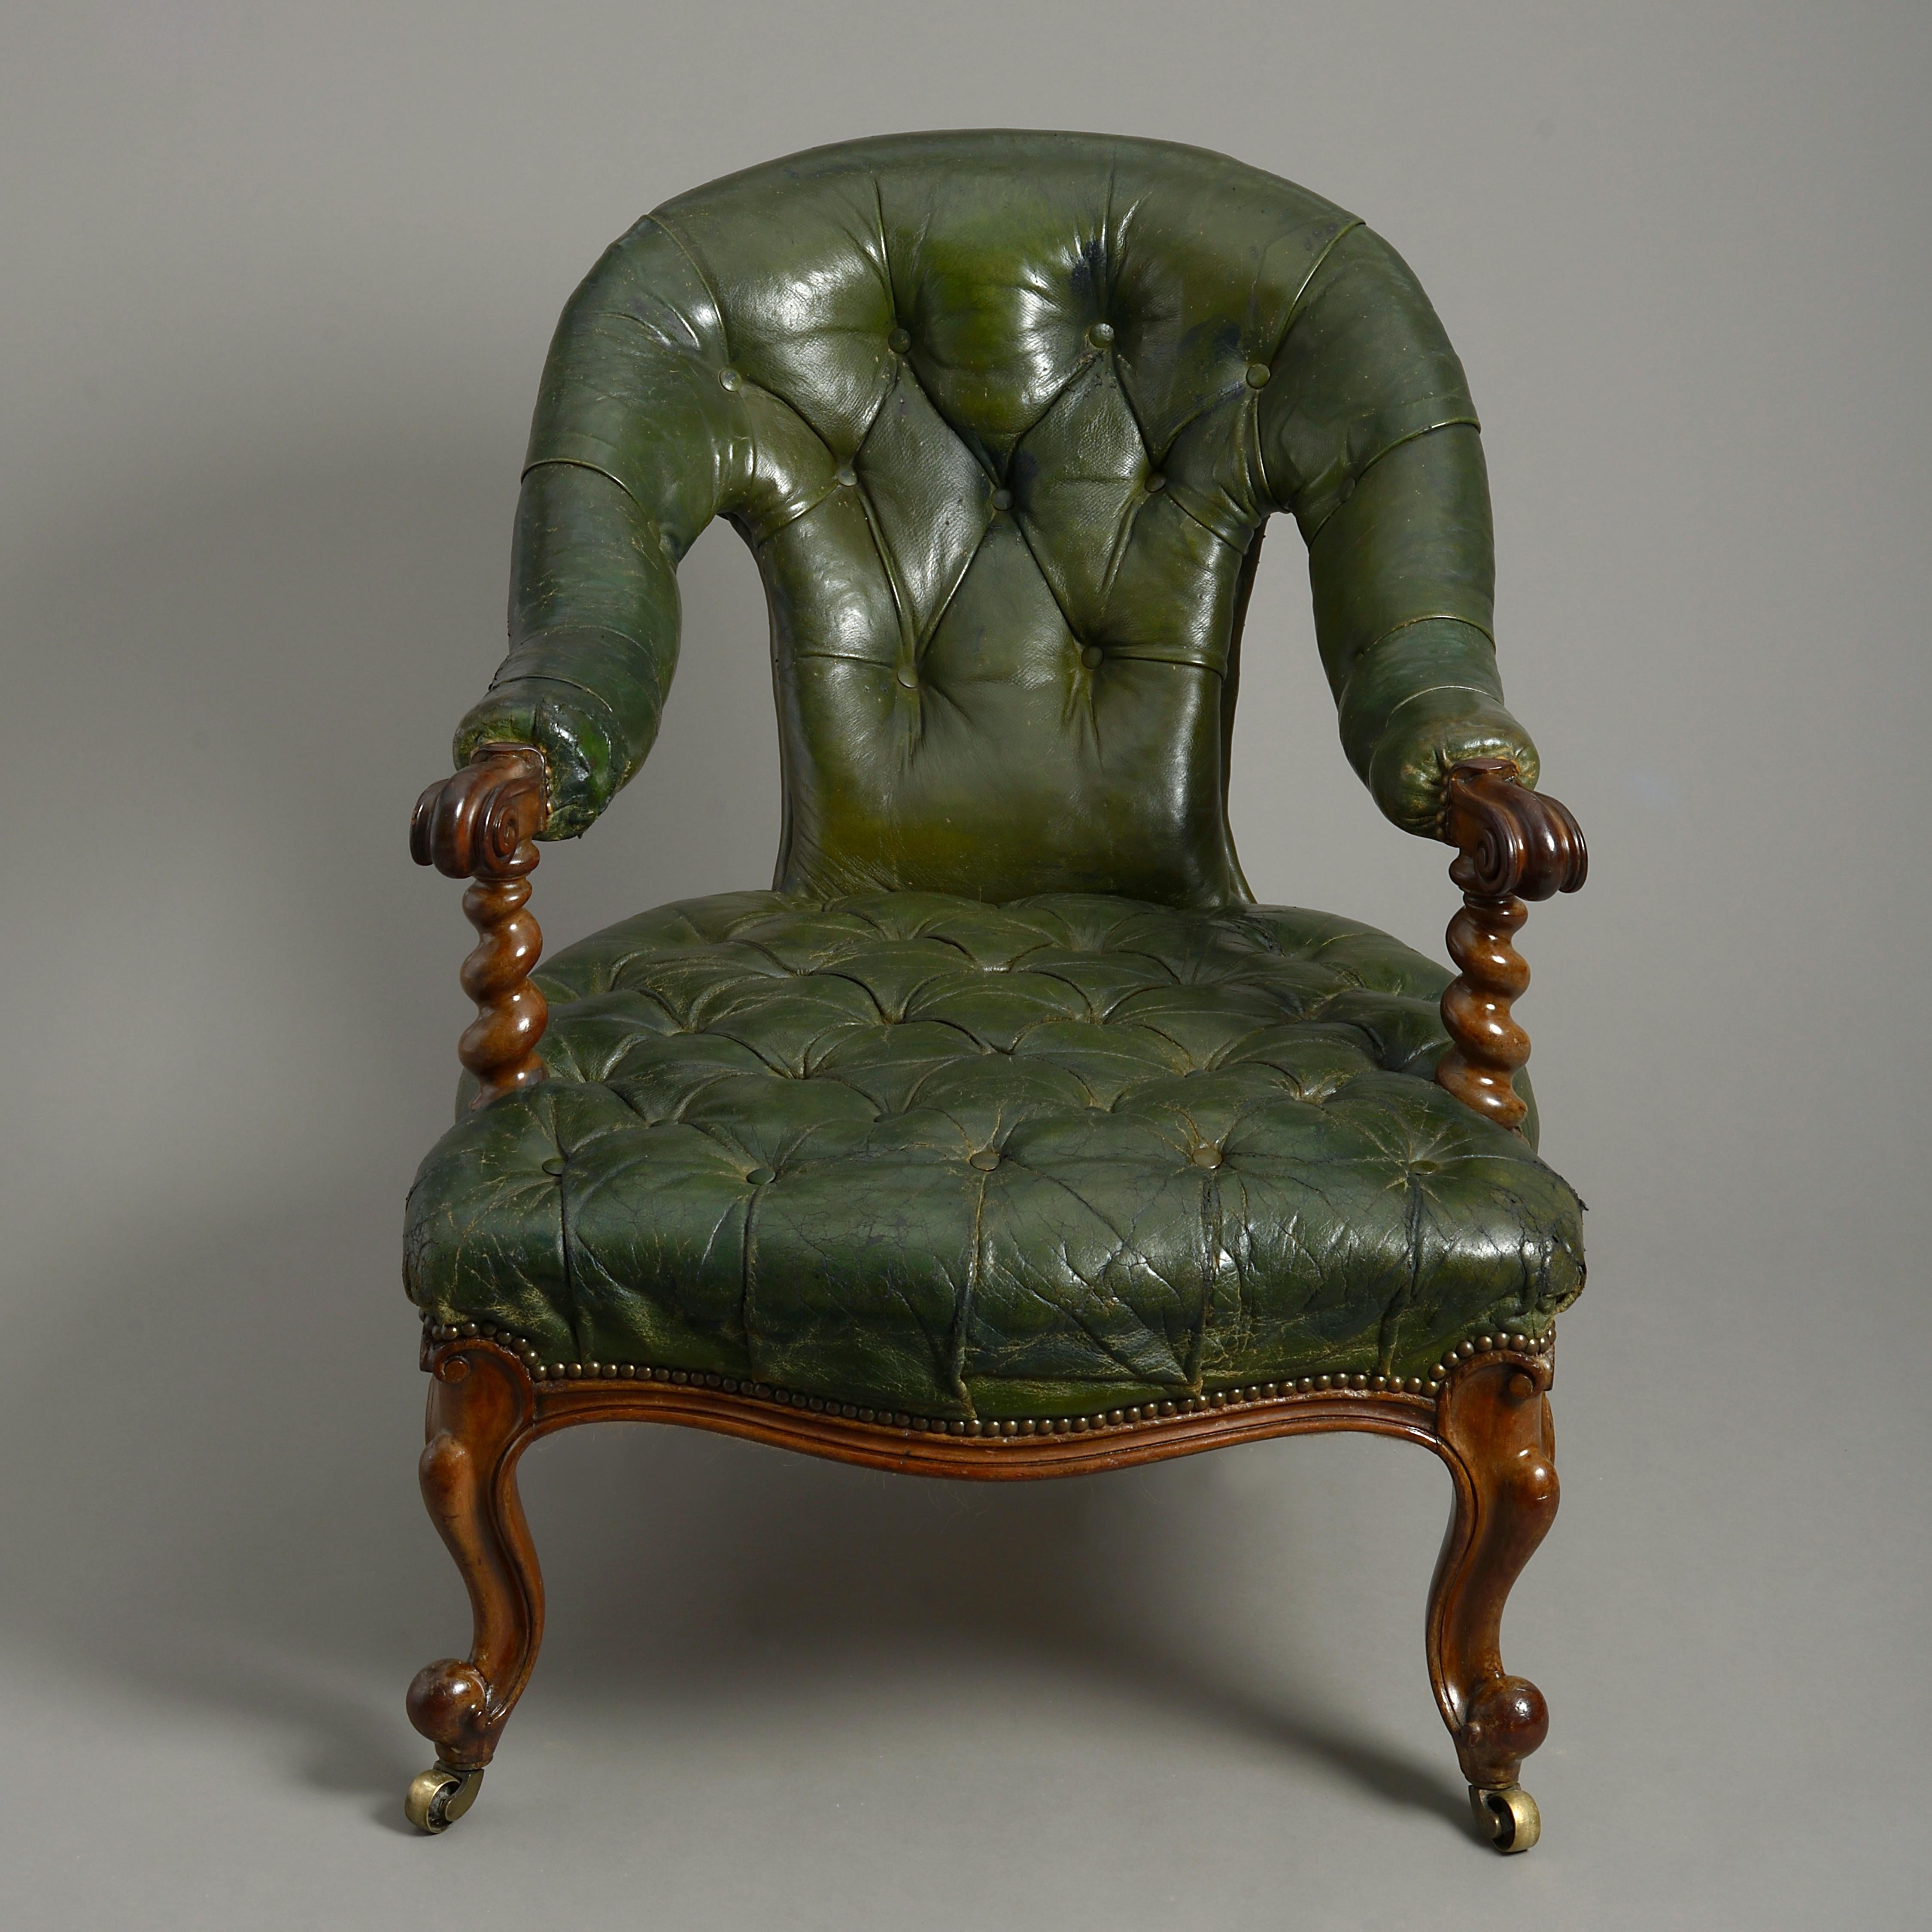 A mid-19th century Victorian Period club easy armchair, the back and seat retaining the original deep buttoned green leather covering, the arms supported upon barley twist walnut supports, the whole raised on cabriole legs of the same and